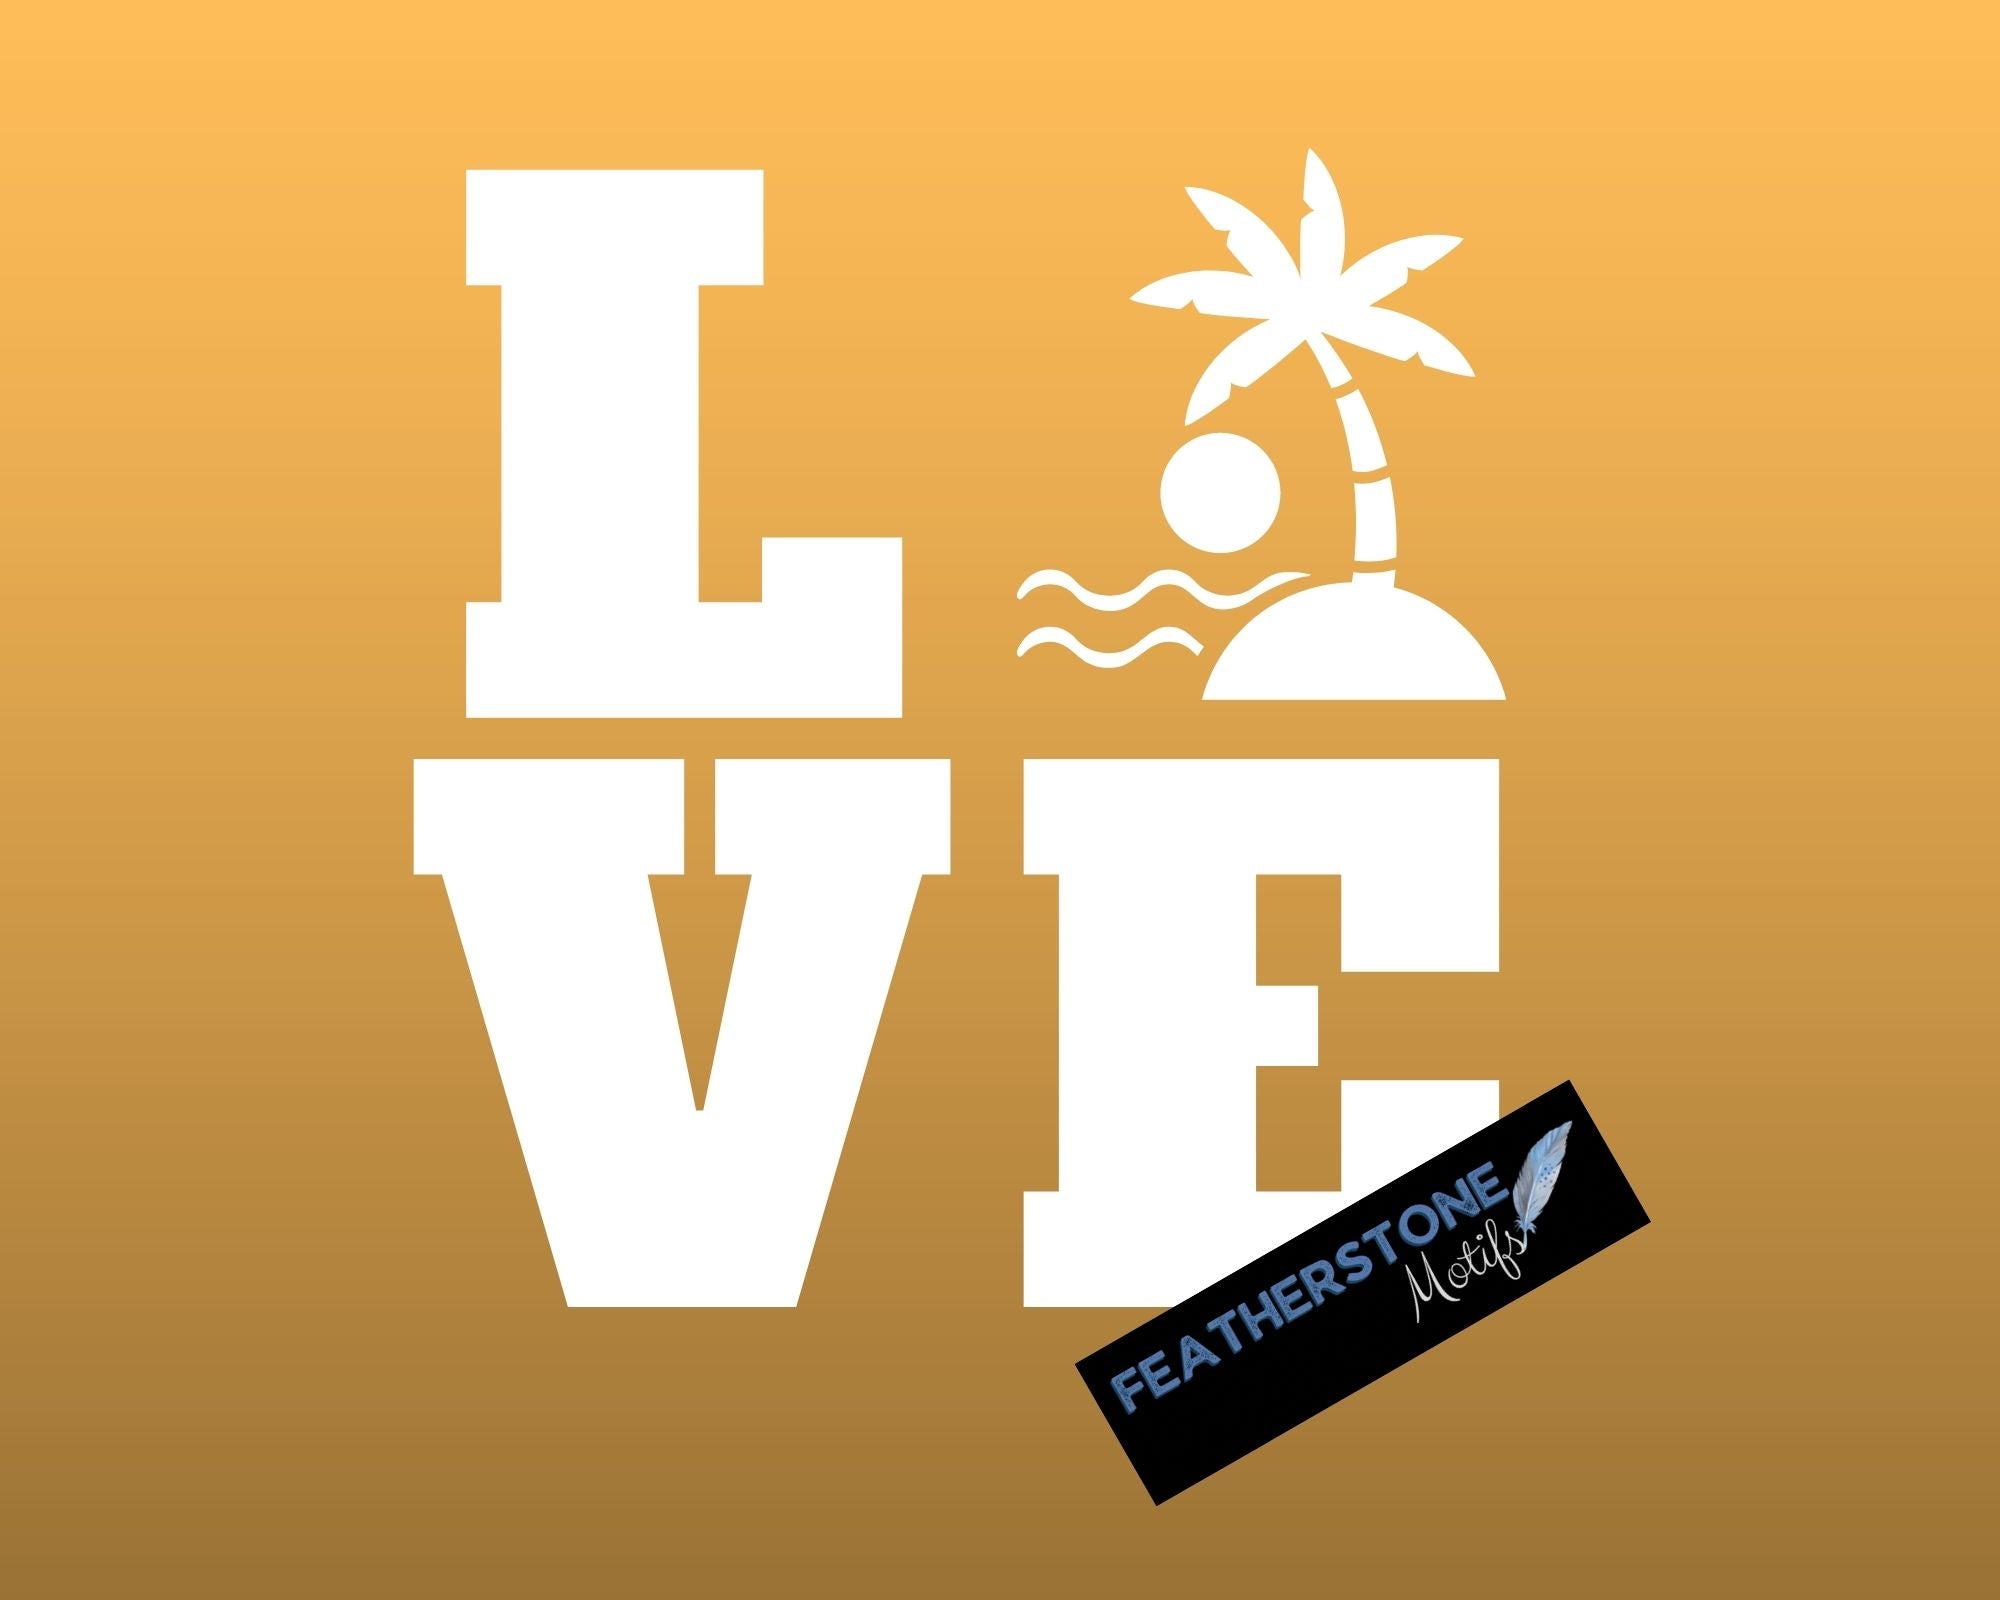 Love the beach? Then show it with this beach themed love square vinyl decal! Available in 4 sizes and 10 colors, these vinyl decals make great gifts for everyone. This image shows the Beach Love Square vinyl decal on a gold background.